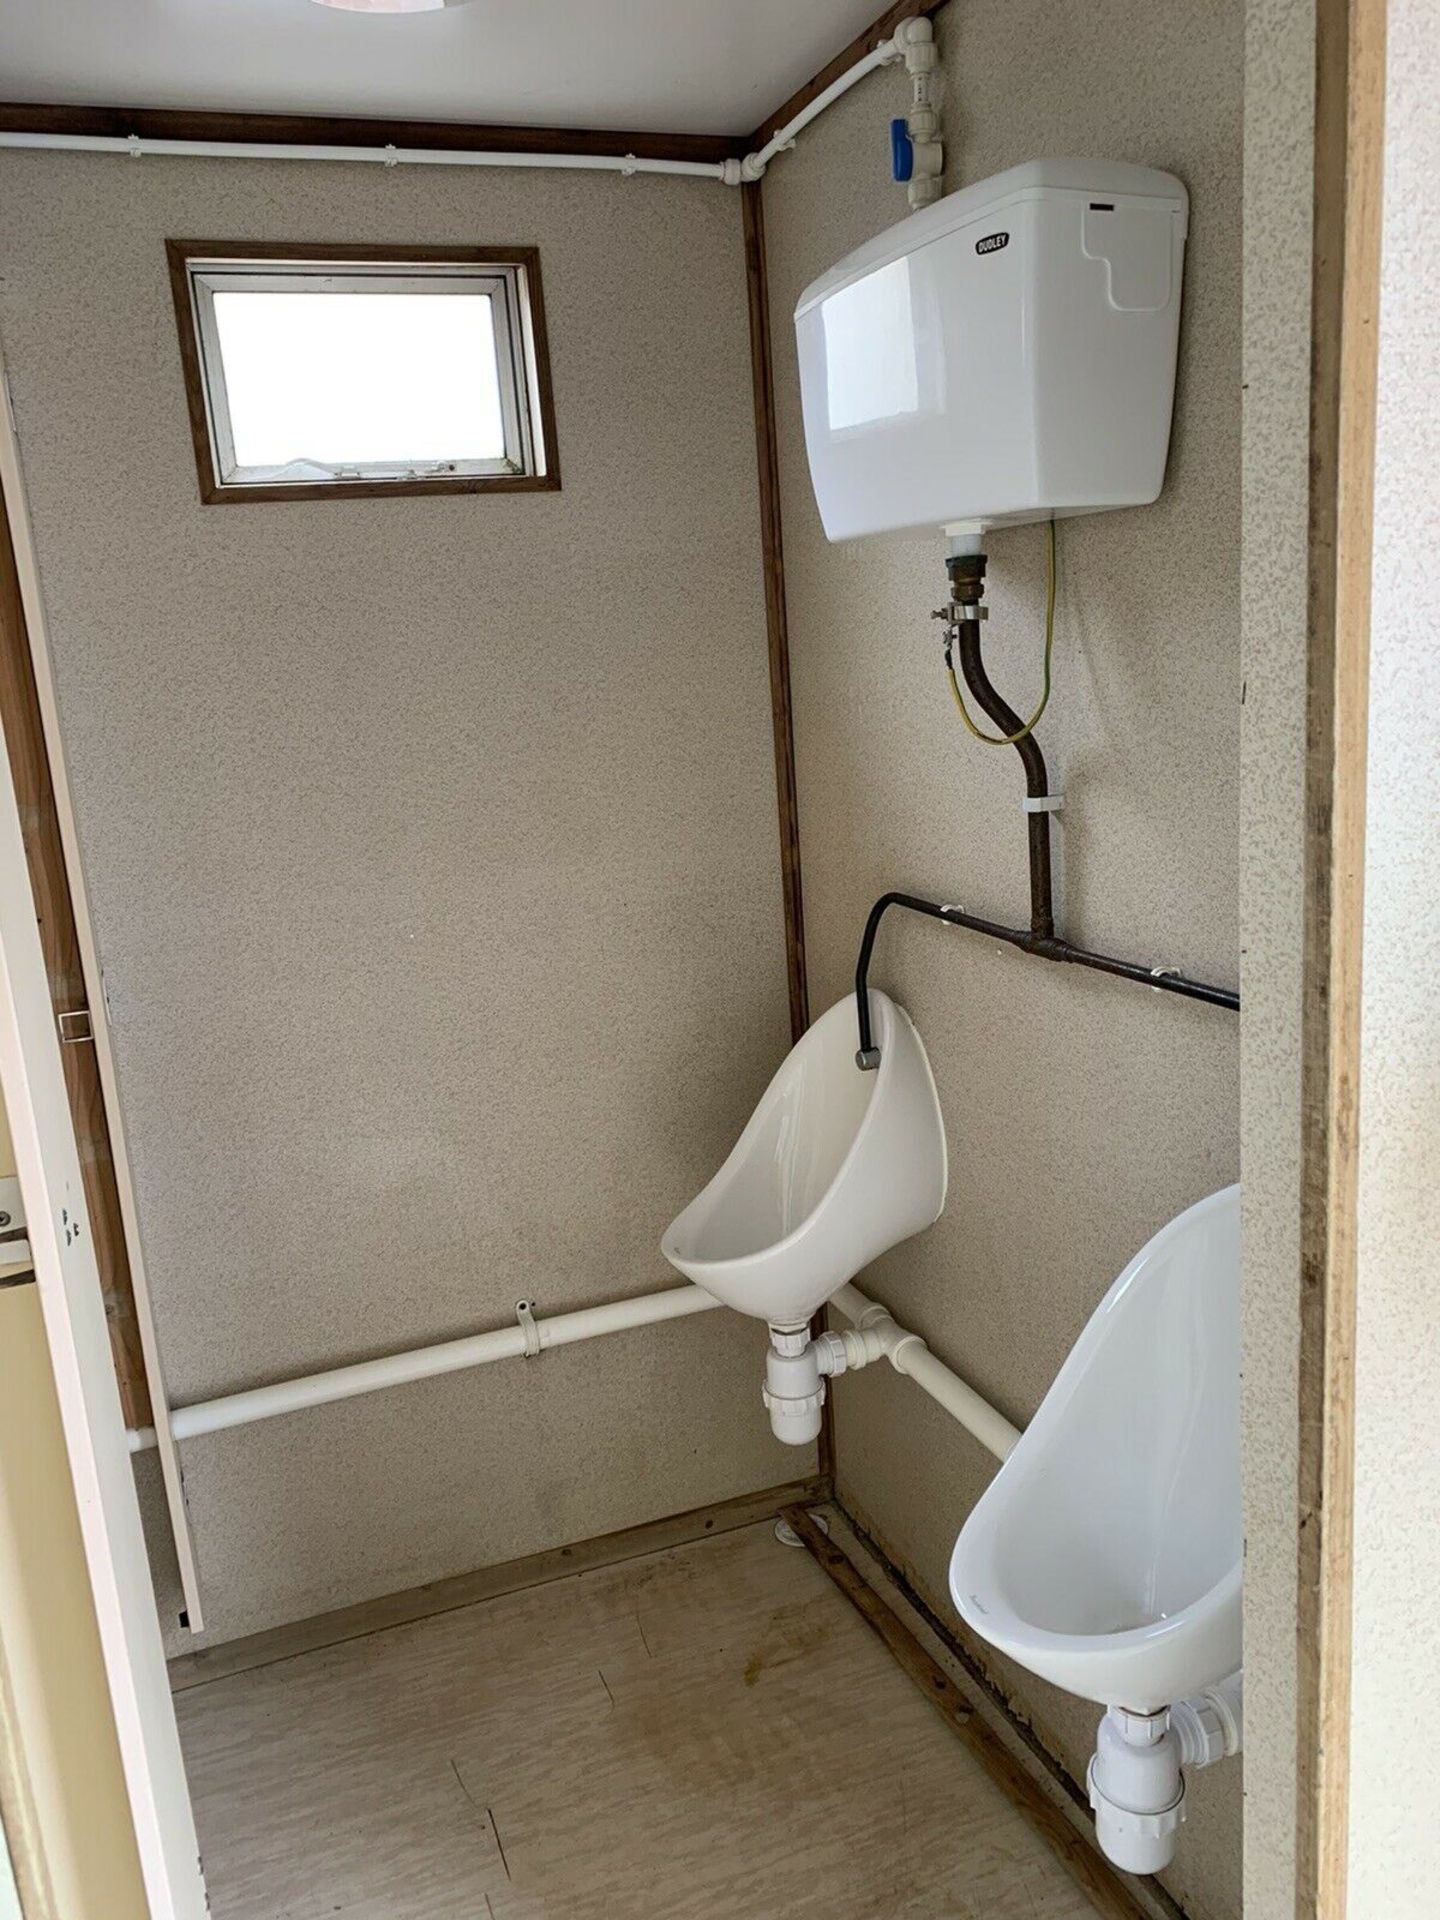 Portable Shower Drying Room With Toilets - Image 8 of 11